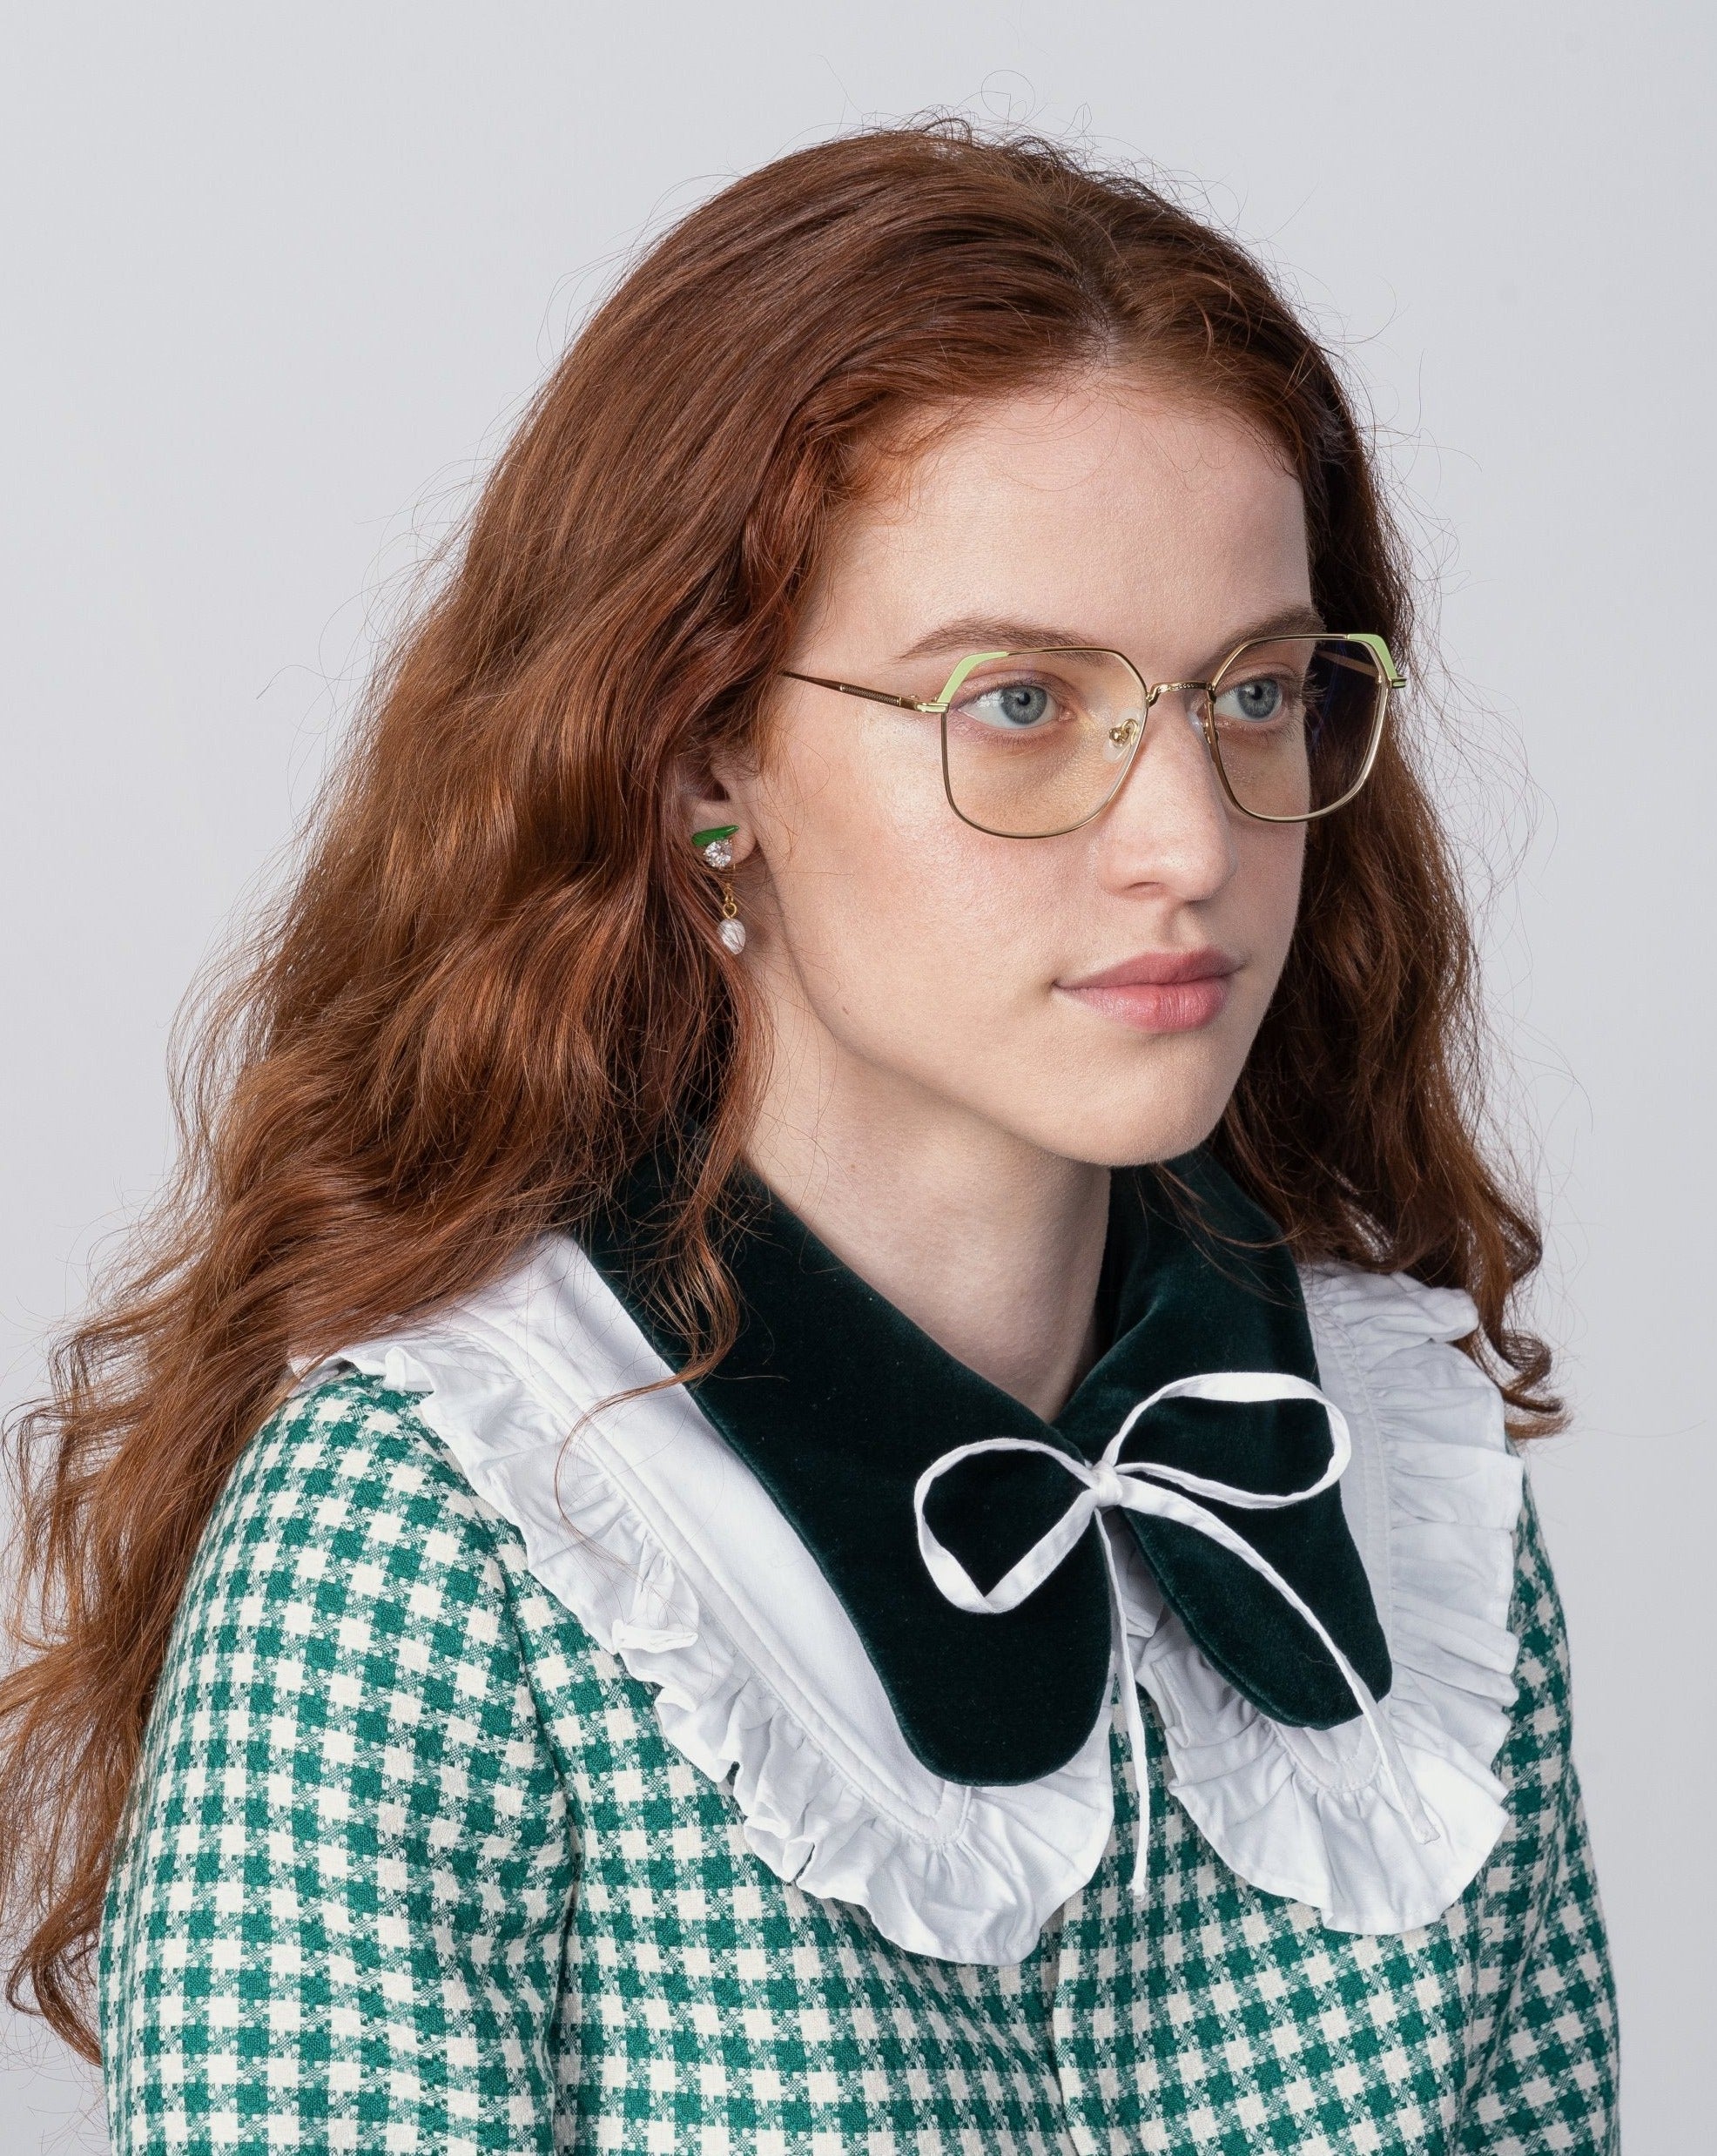 A person with long, wavy, red hair and wearing glasses with prescription lenses from For Art's Sake® looks to the side. They are dressed in a green and white checkered outfit with a large black collar adorned with a white ruffle and bow. The background is plain and light-colored.